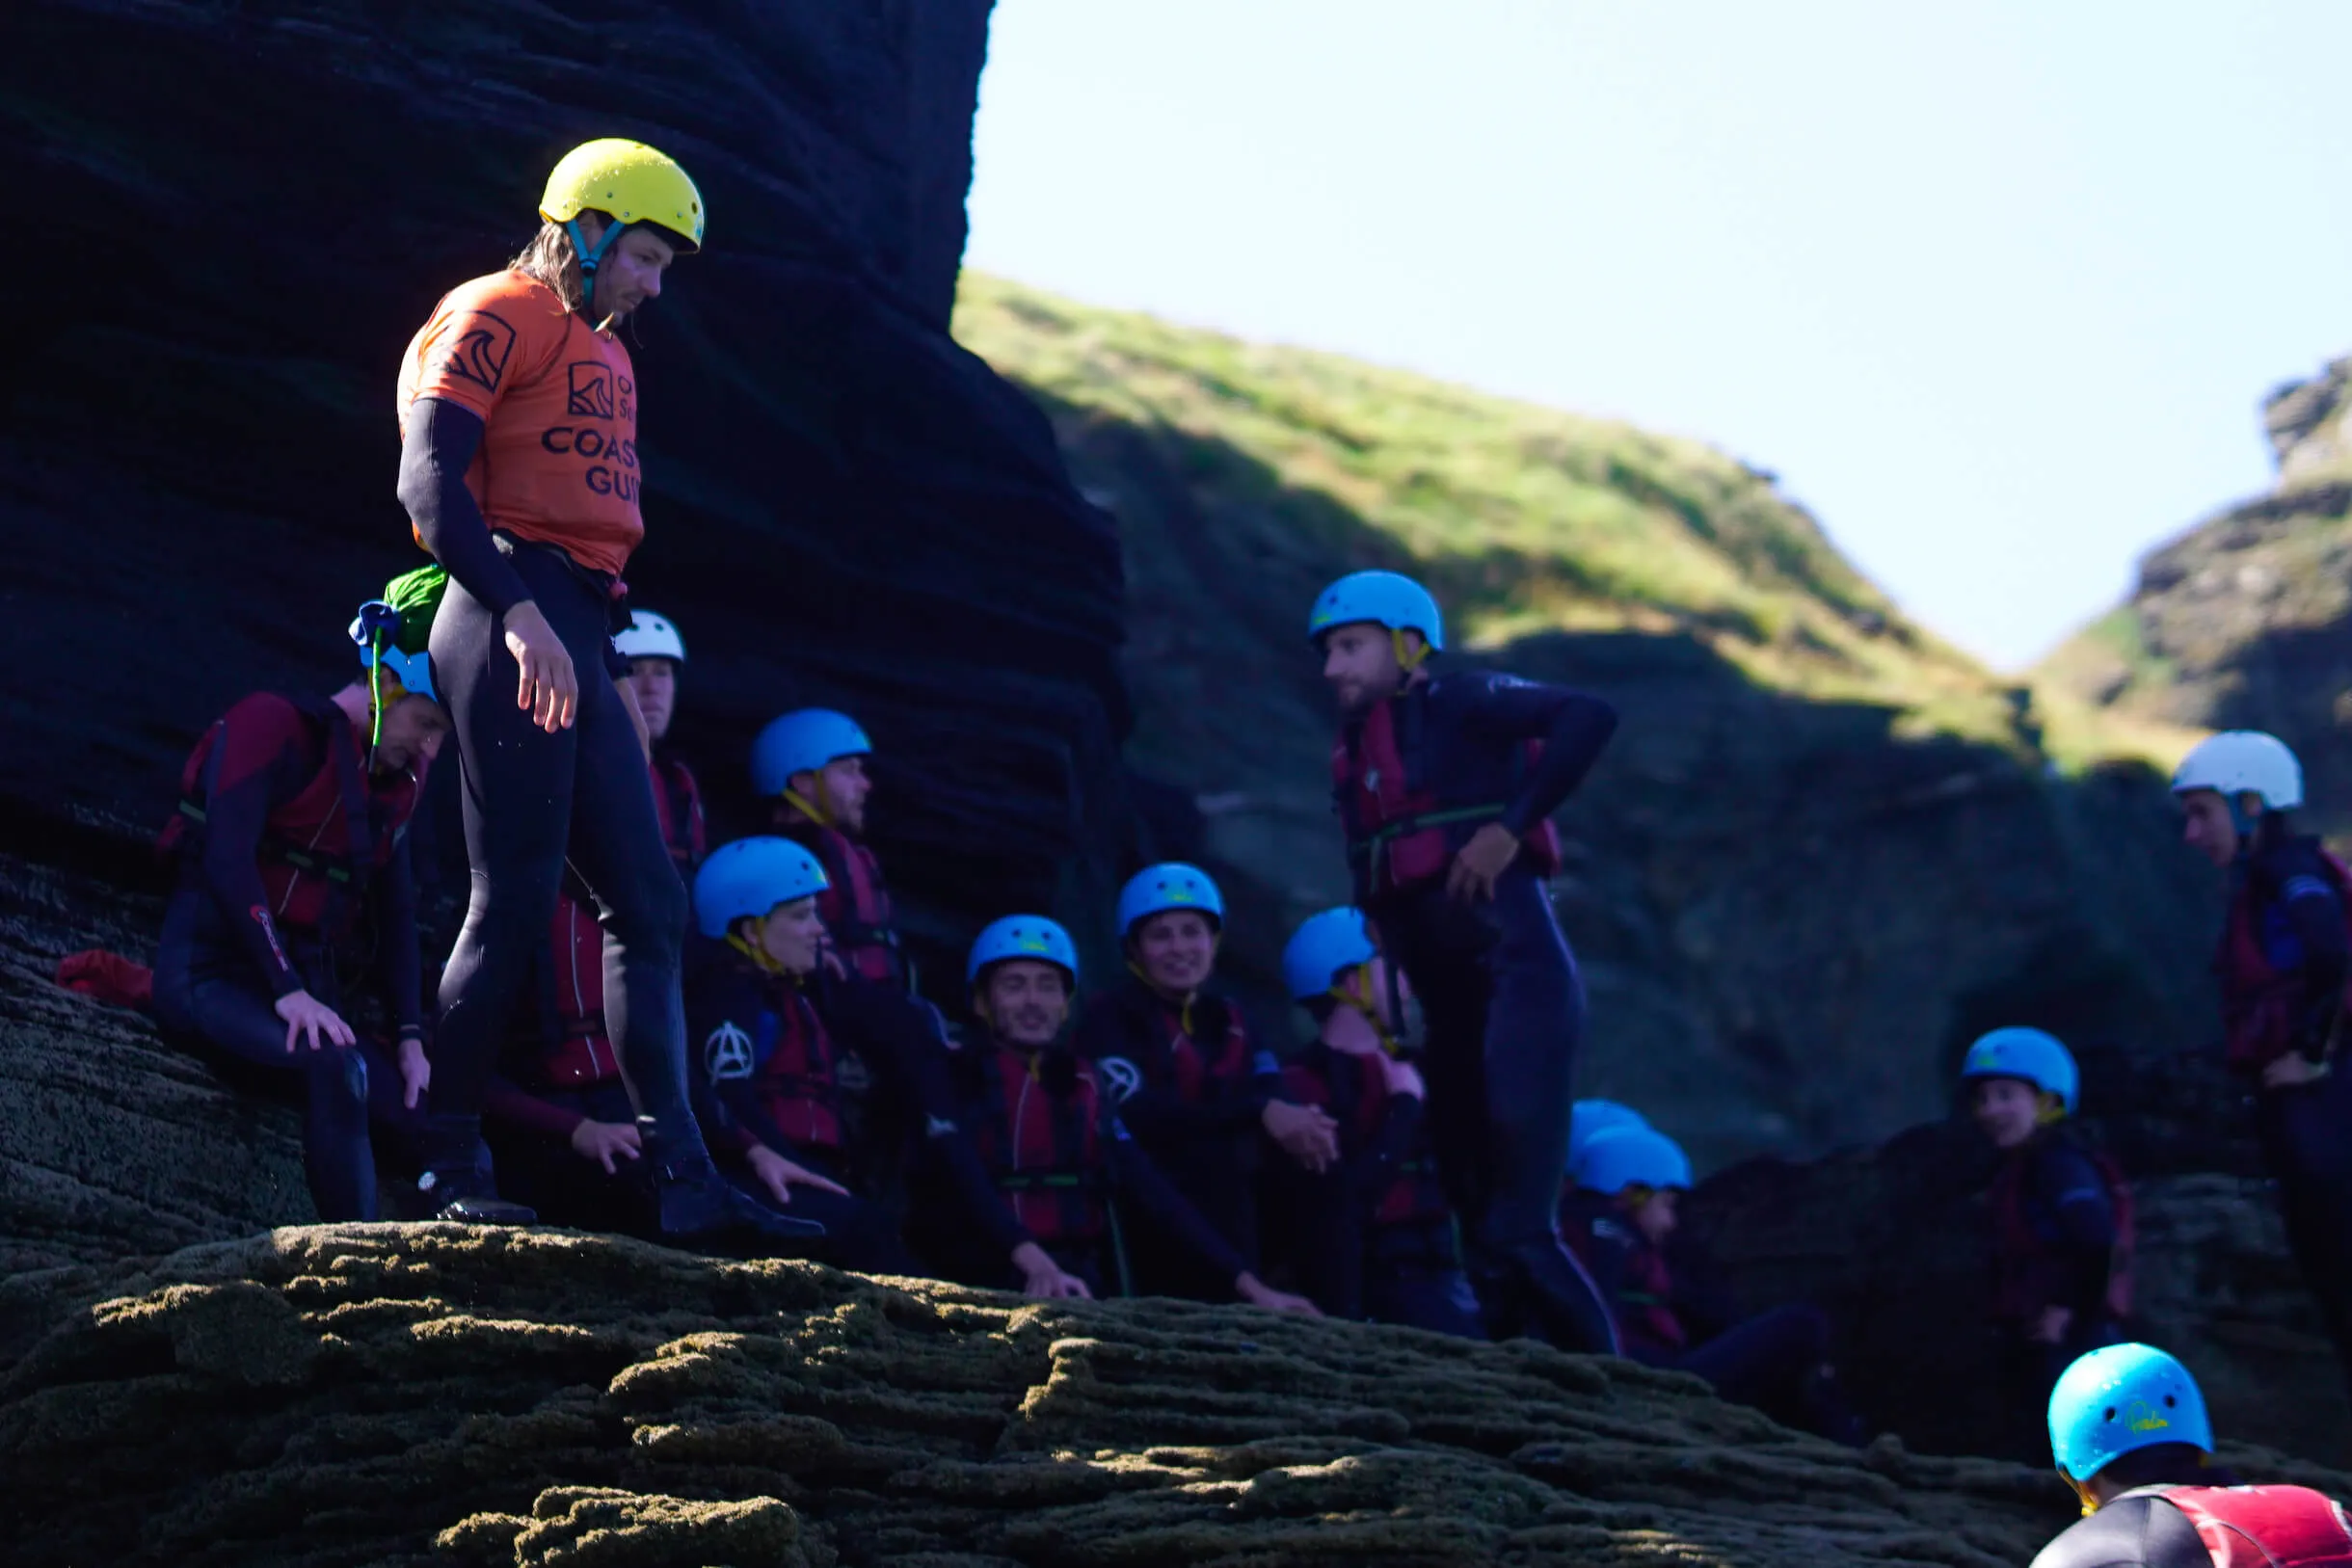 coasteering cornwall - great for corporate events in cornwall. Image of group standing with instructor on rocks, ready to jump in the sea